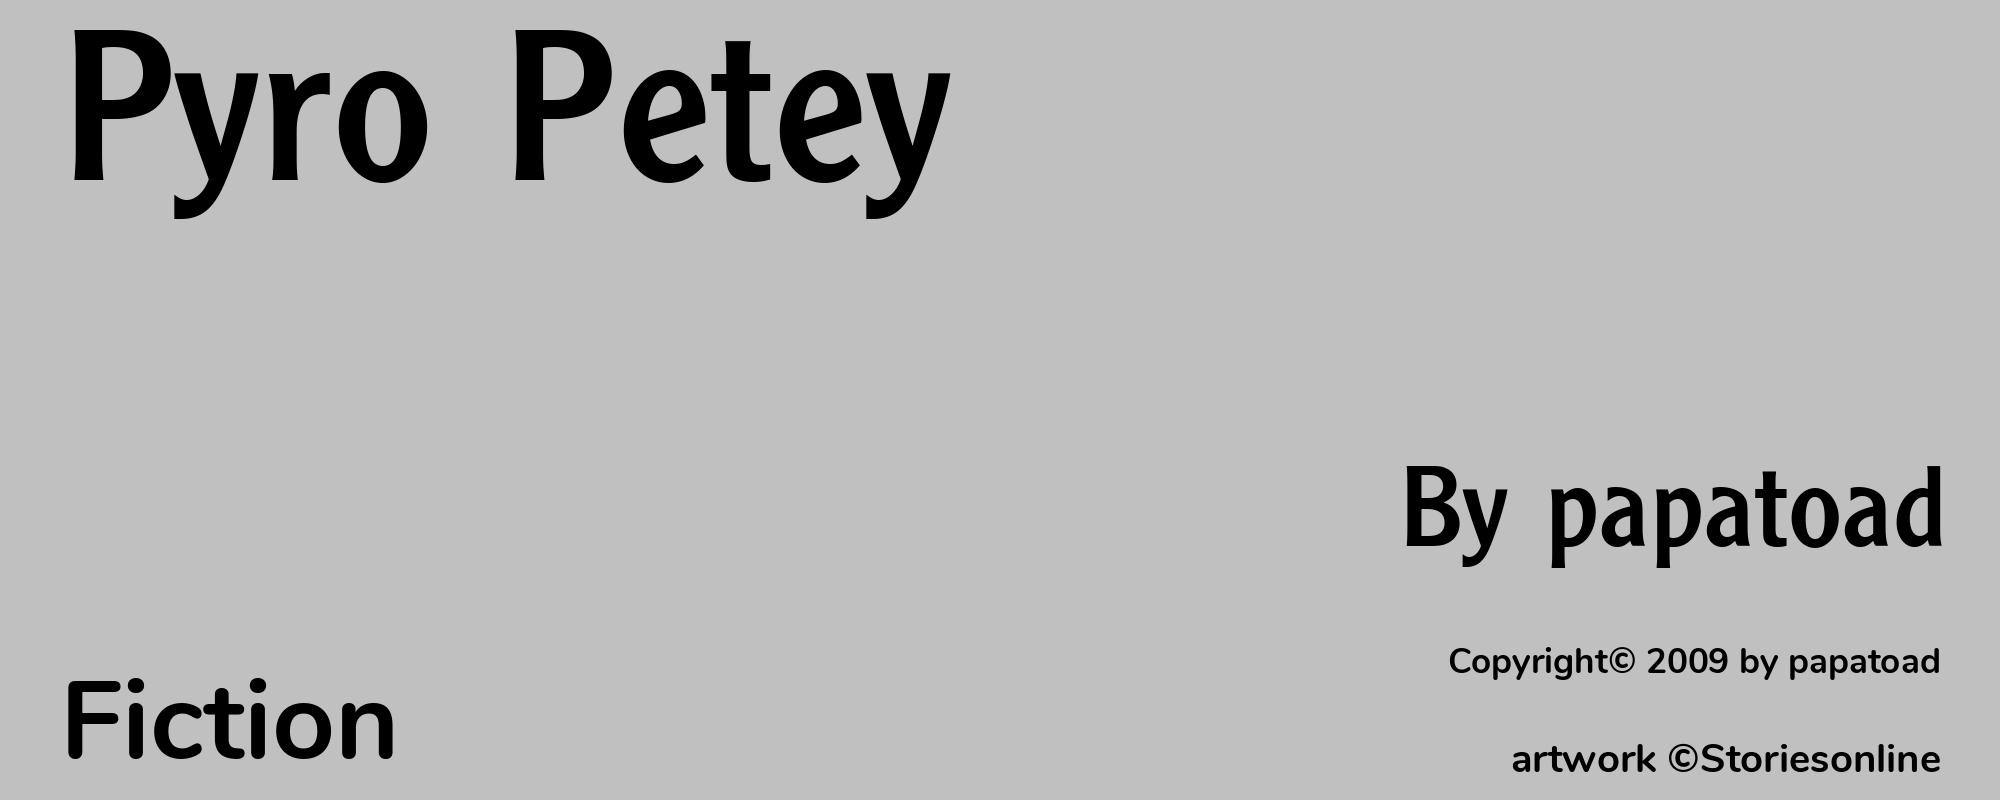 Pyro Petey - Cover